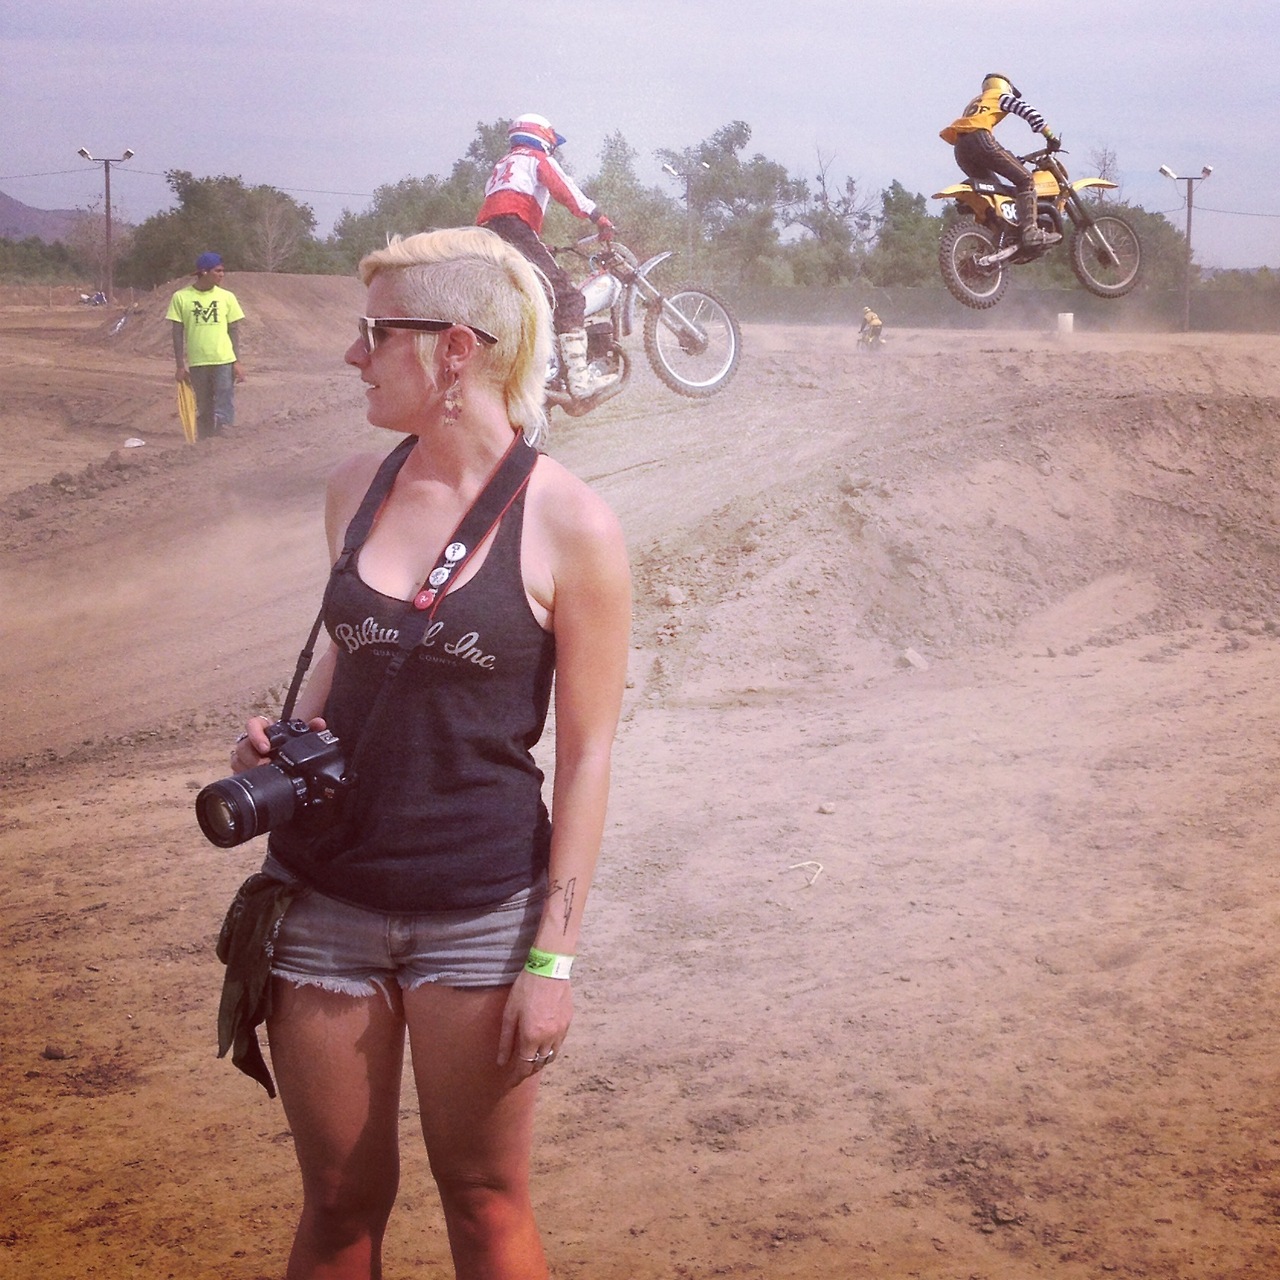 Alicia of MotoLady in true form, mouth agape watching awesome 2strokes fly over the jumps